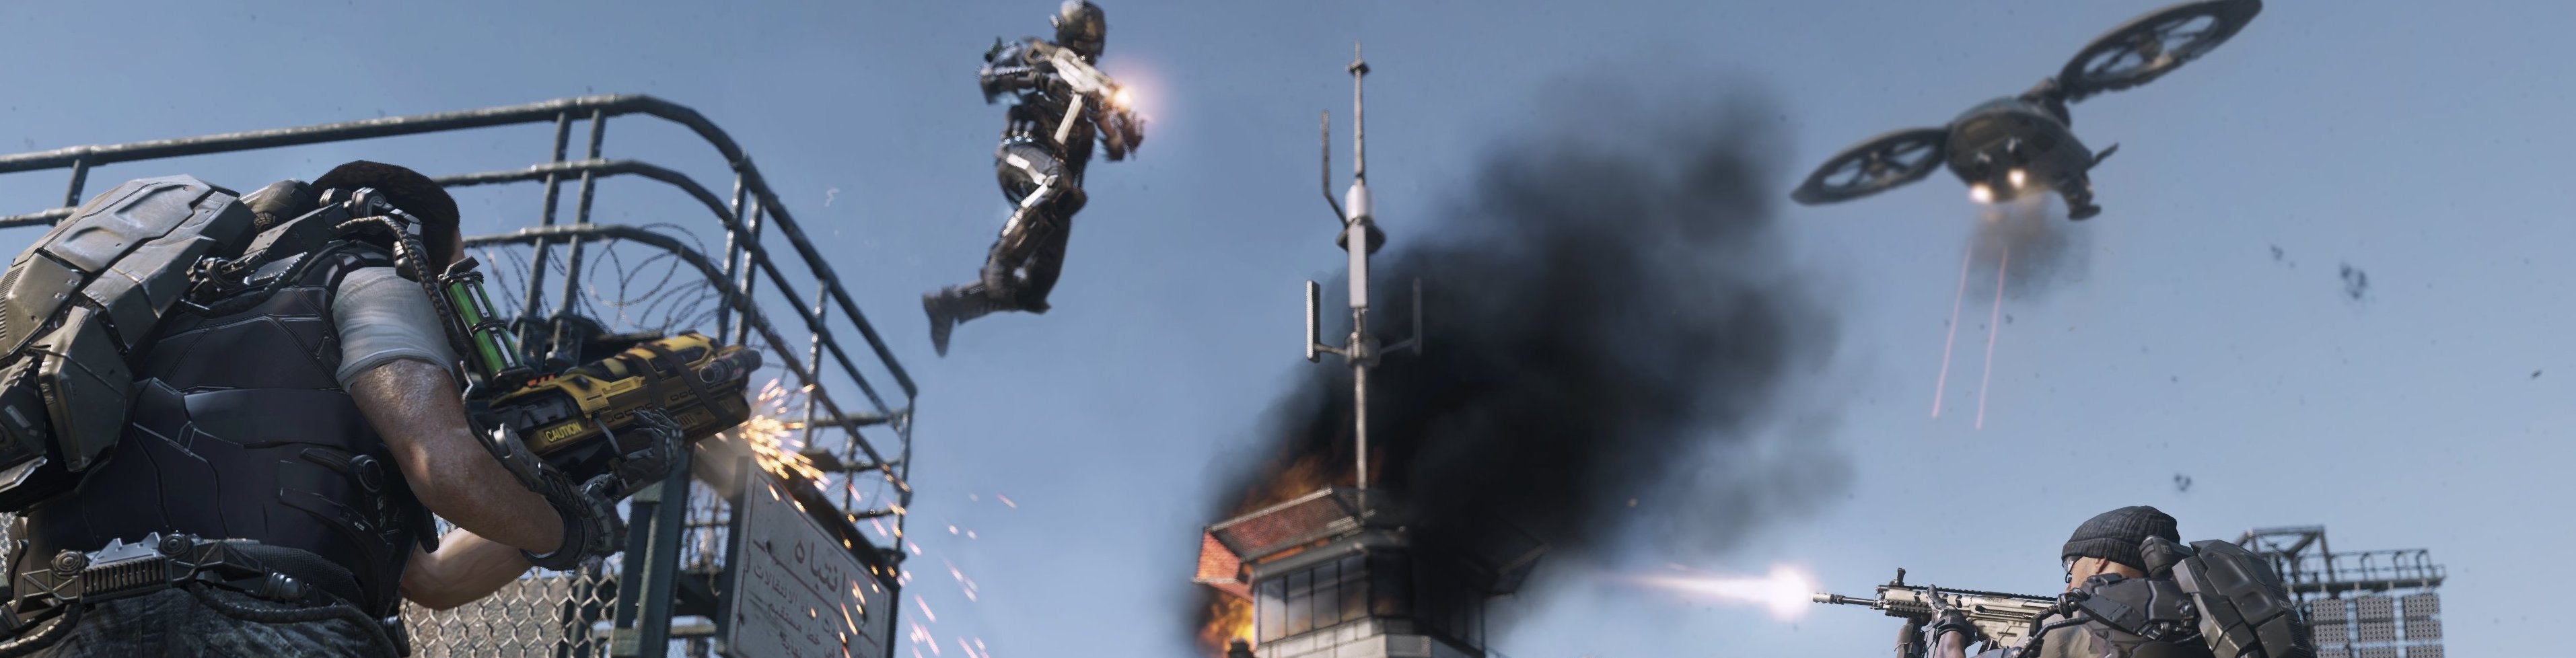 Image for Detaily o online části Call of Duty: Advanced Warfare